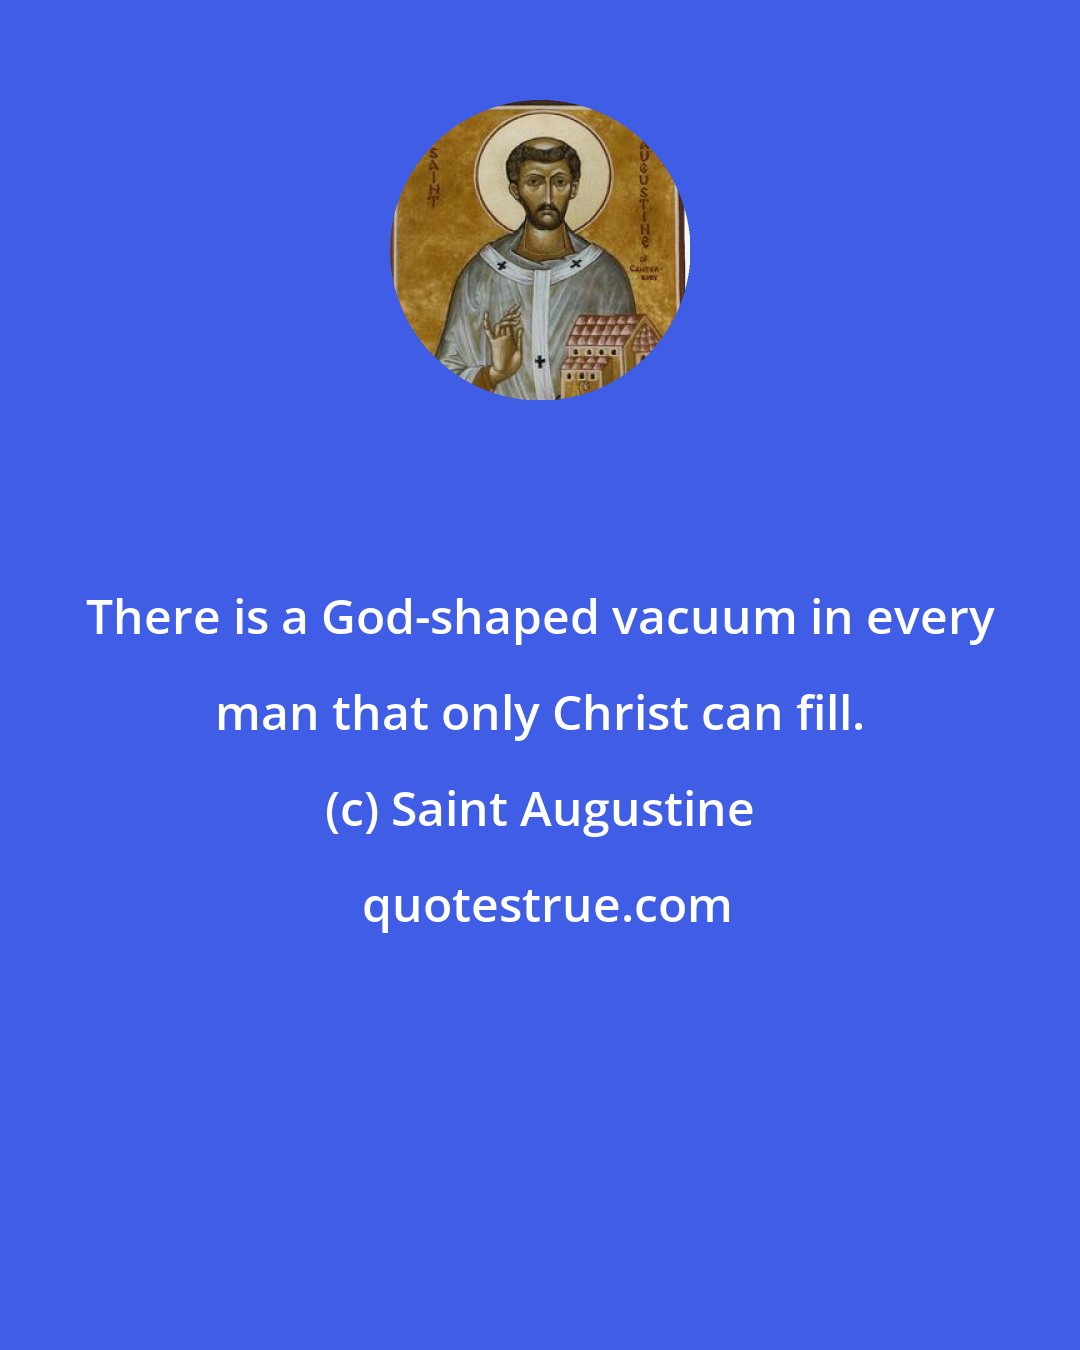 Saint Augustine: There is a God-shaped vacuum in every man that only Christ can fill.